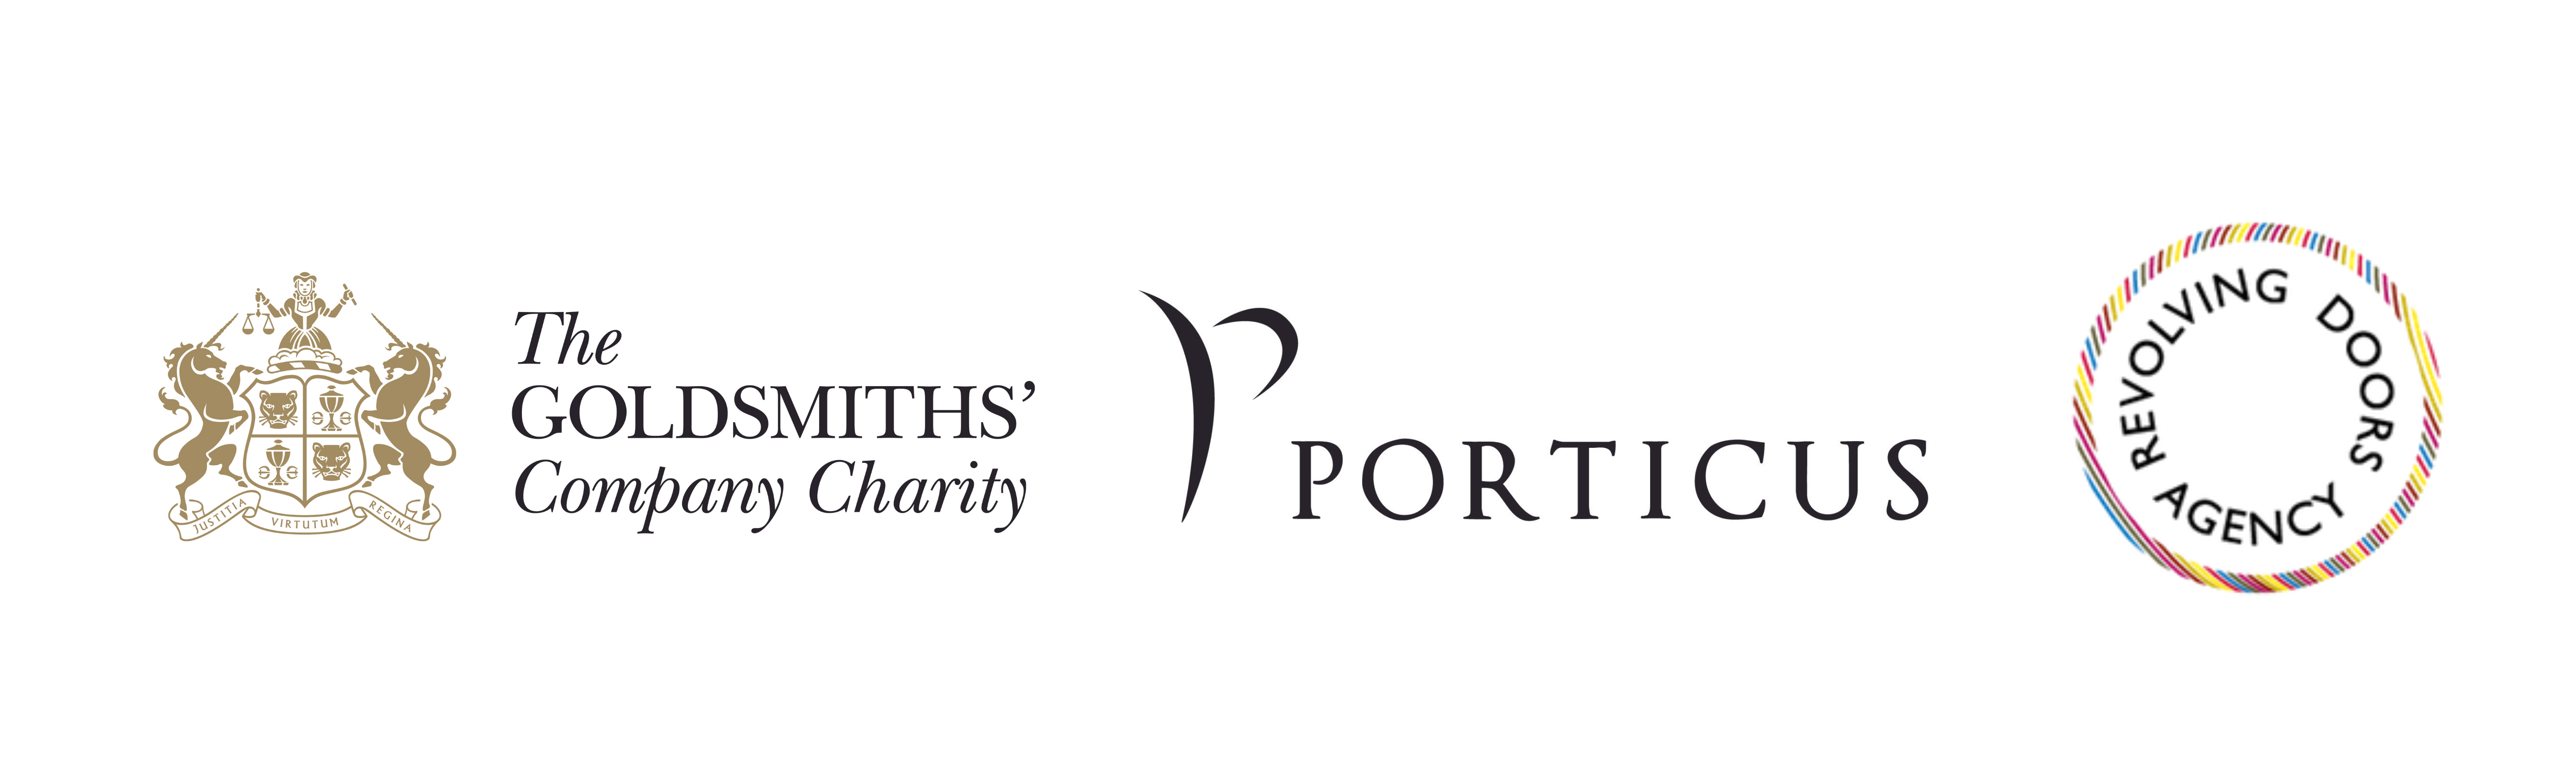 The logos of the Goldsmiths' Compaby, Porticus UK and Revolving Doors Agency.